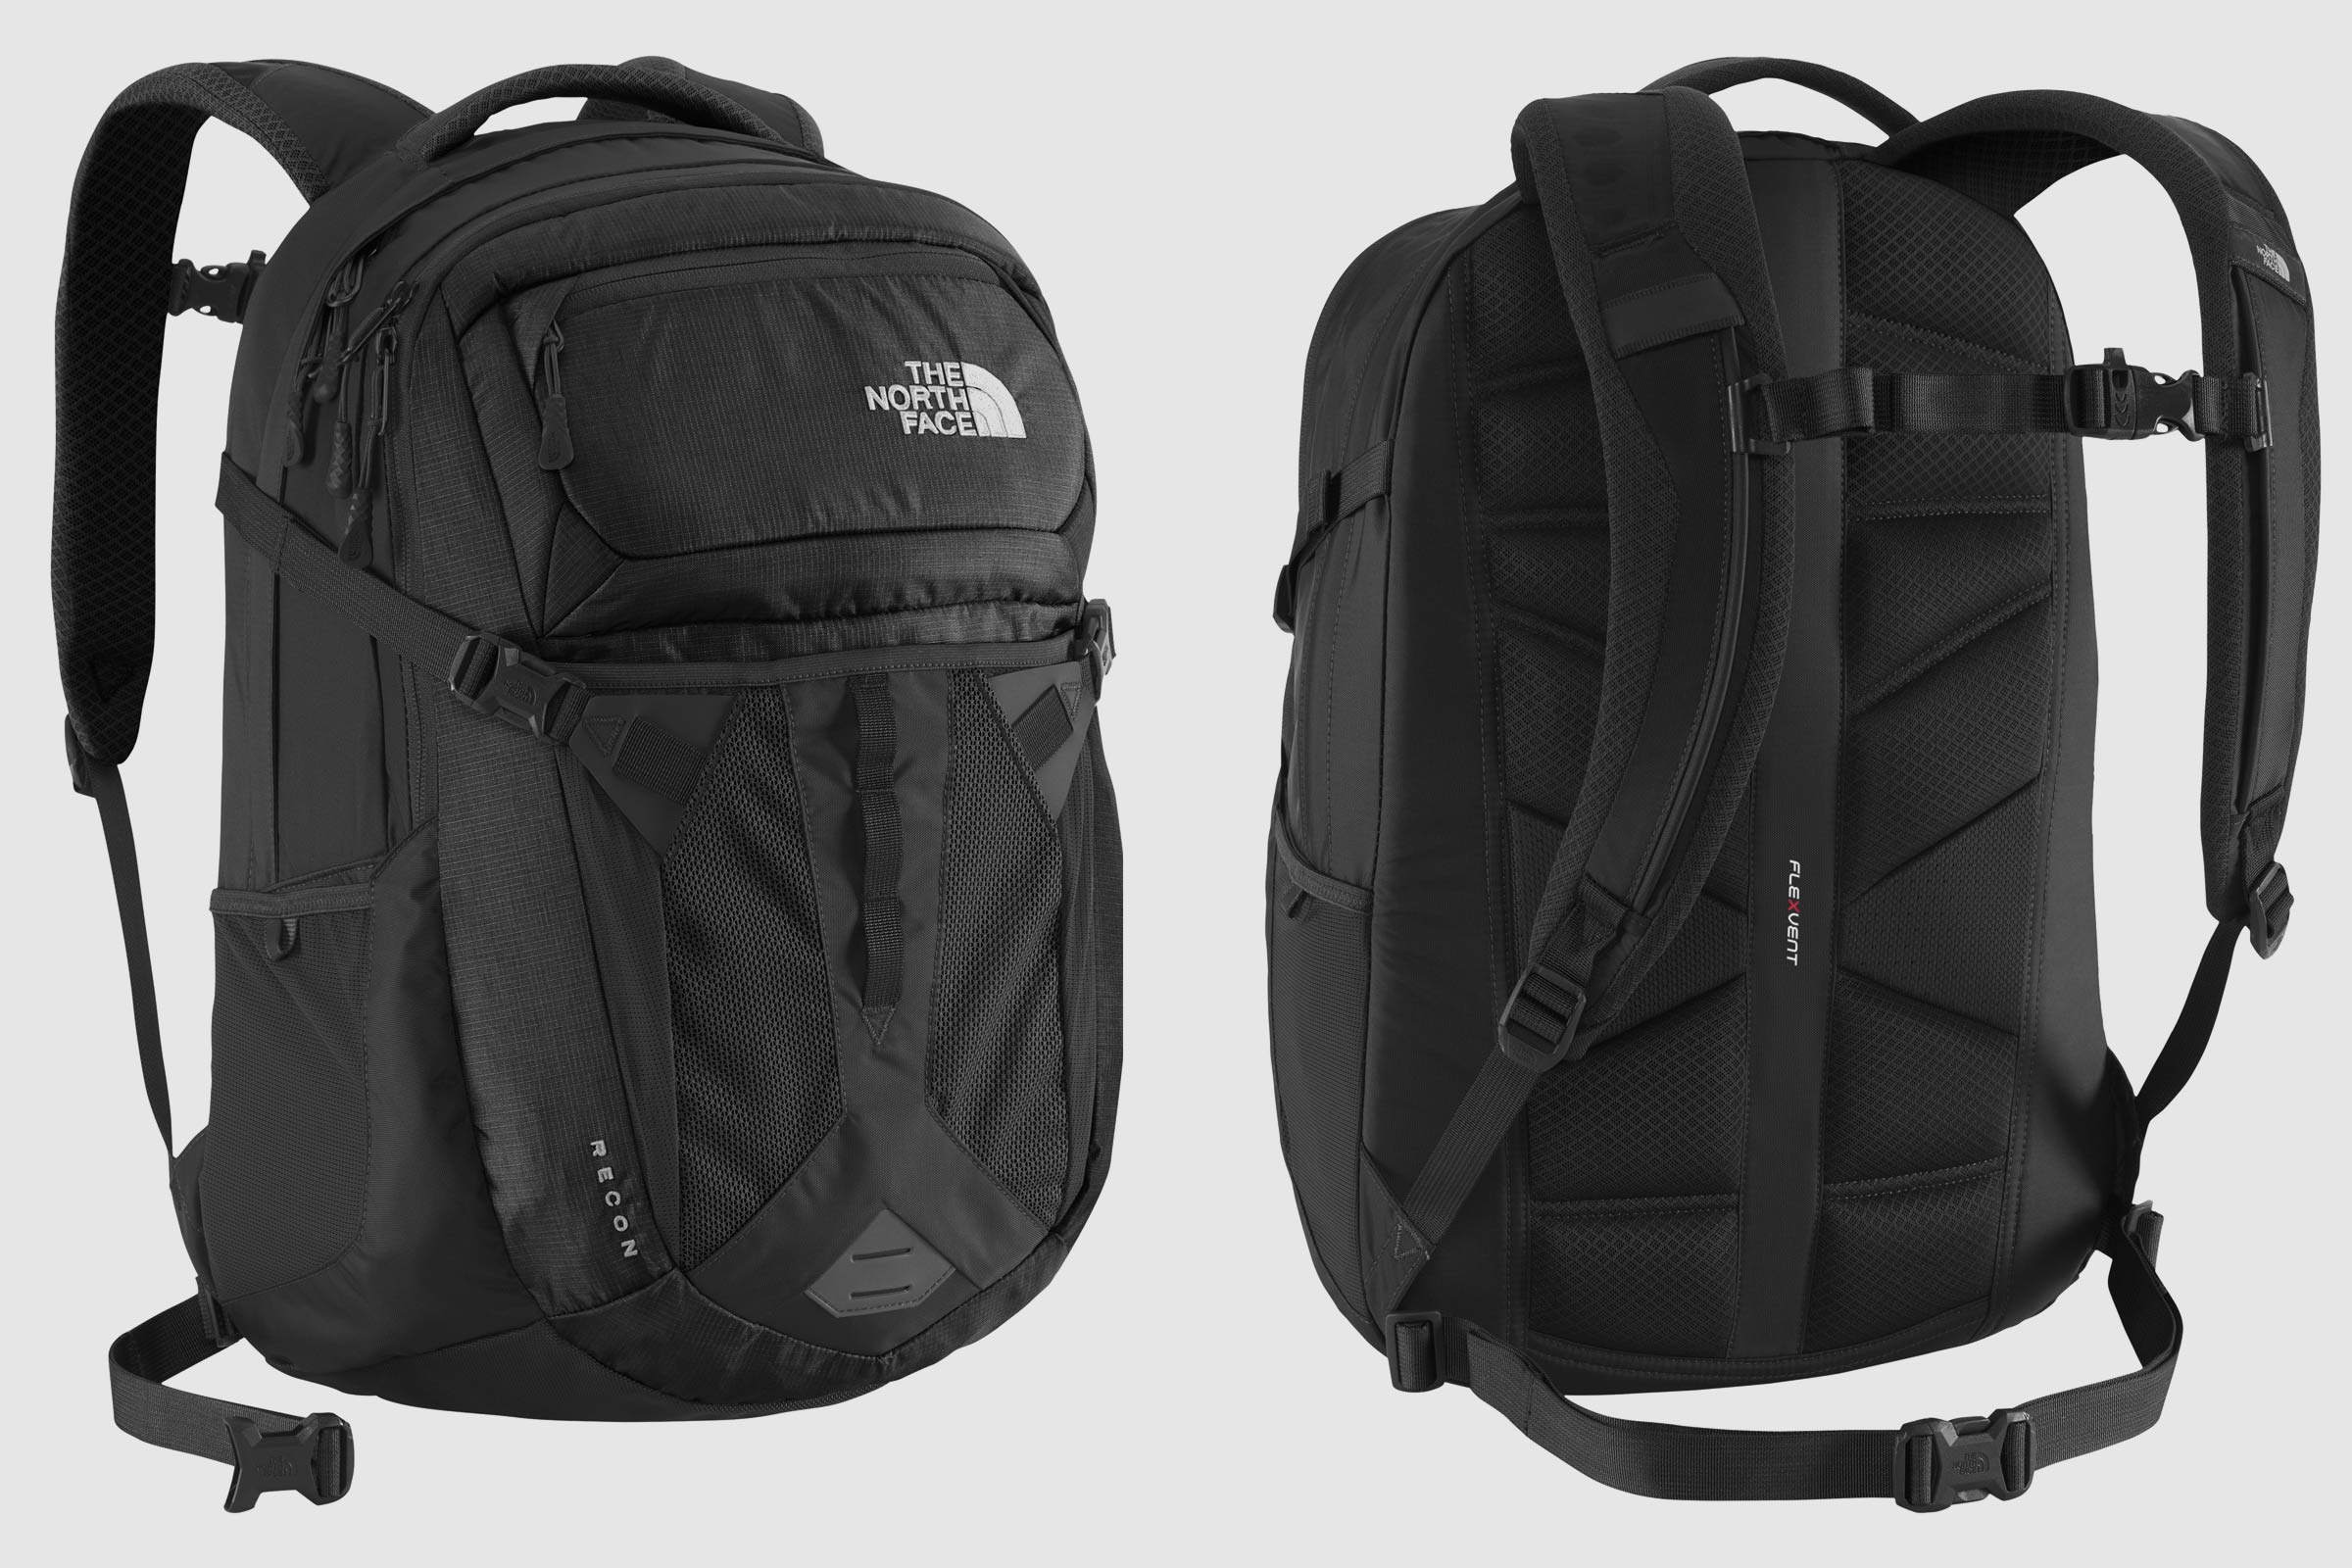 grey north face backpack